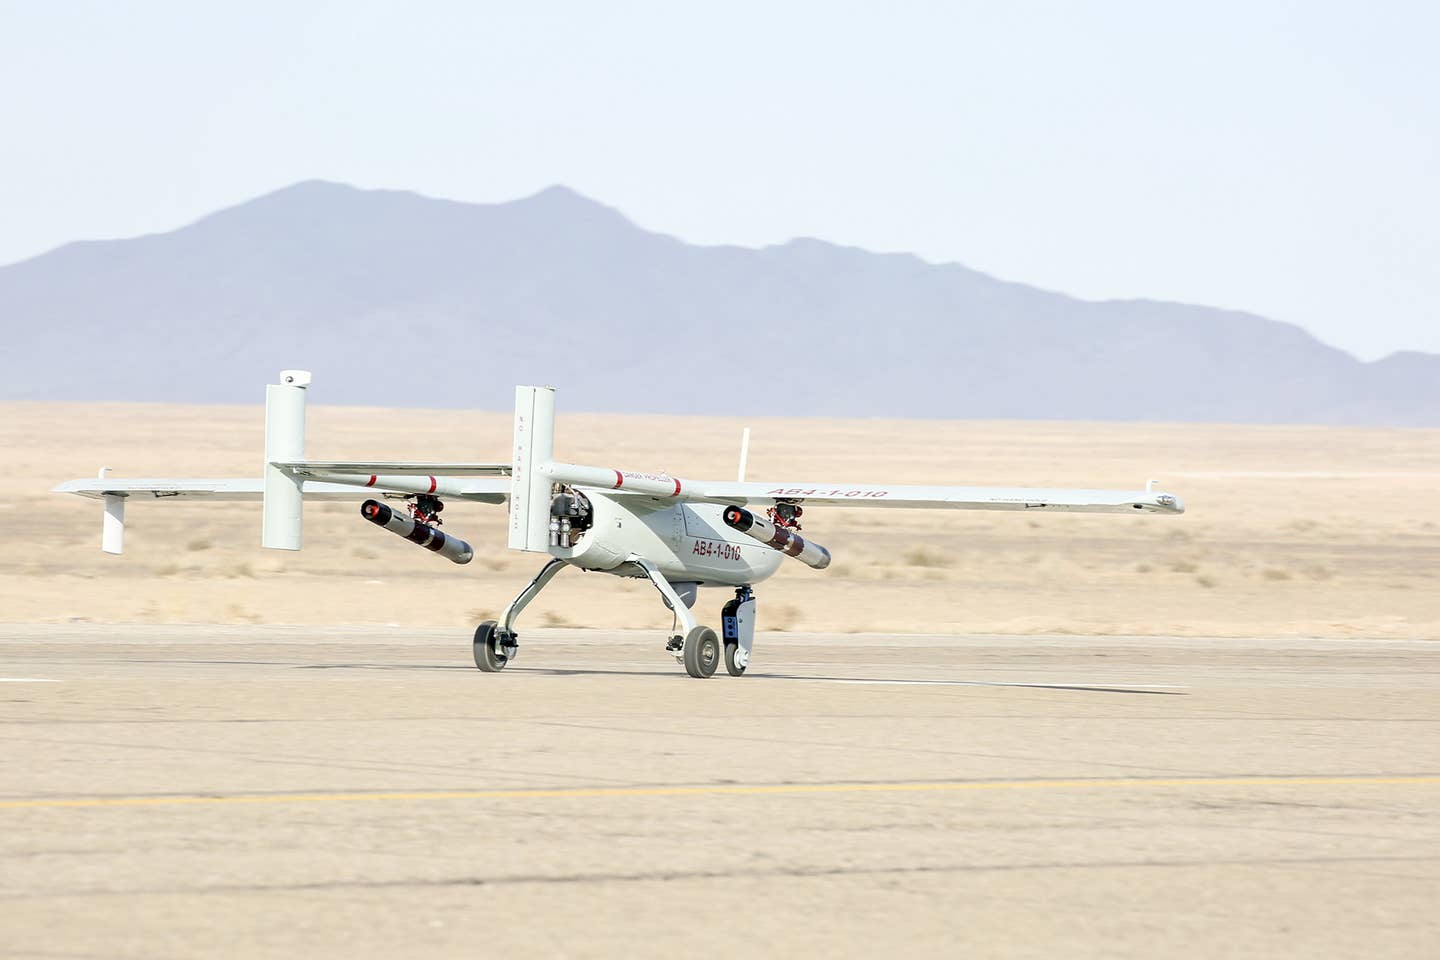 An Iranian Ababil-series armed unmanned aerial vehicle during a military drill held in Semnan, Iran in January 2021. <em>Photo by Iranian Army/Handout/Anadolu Agency via Getty Images</em>